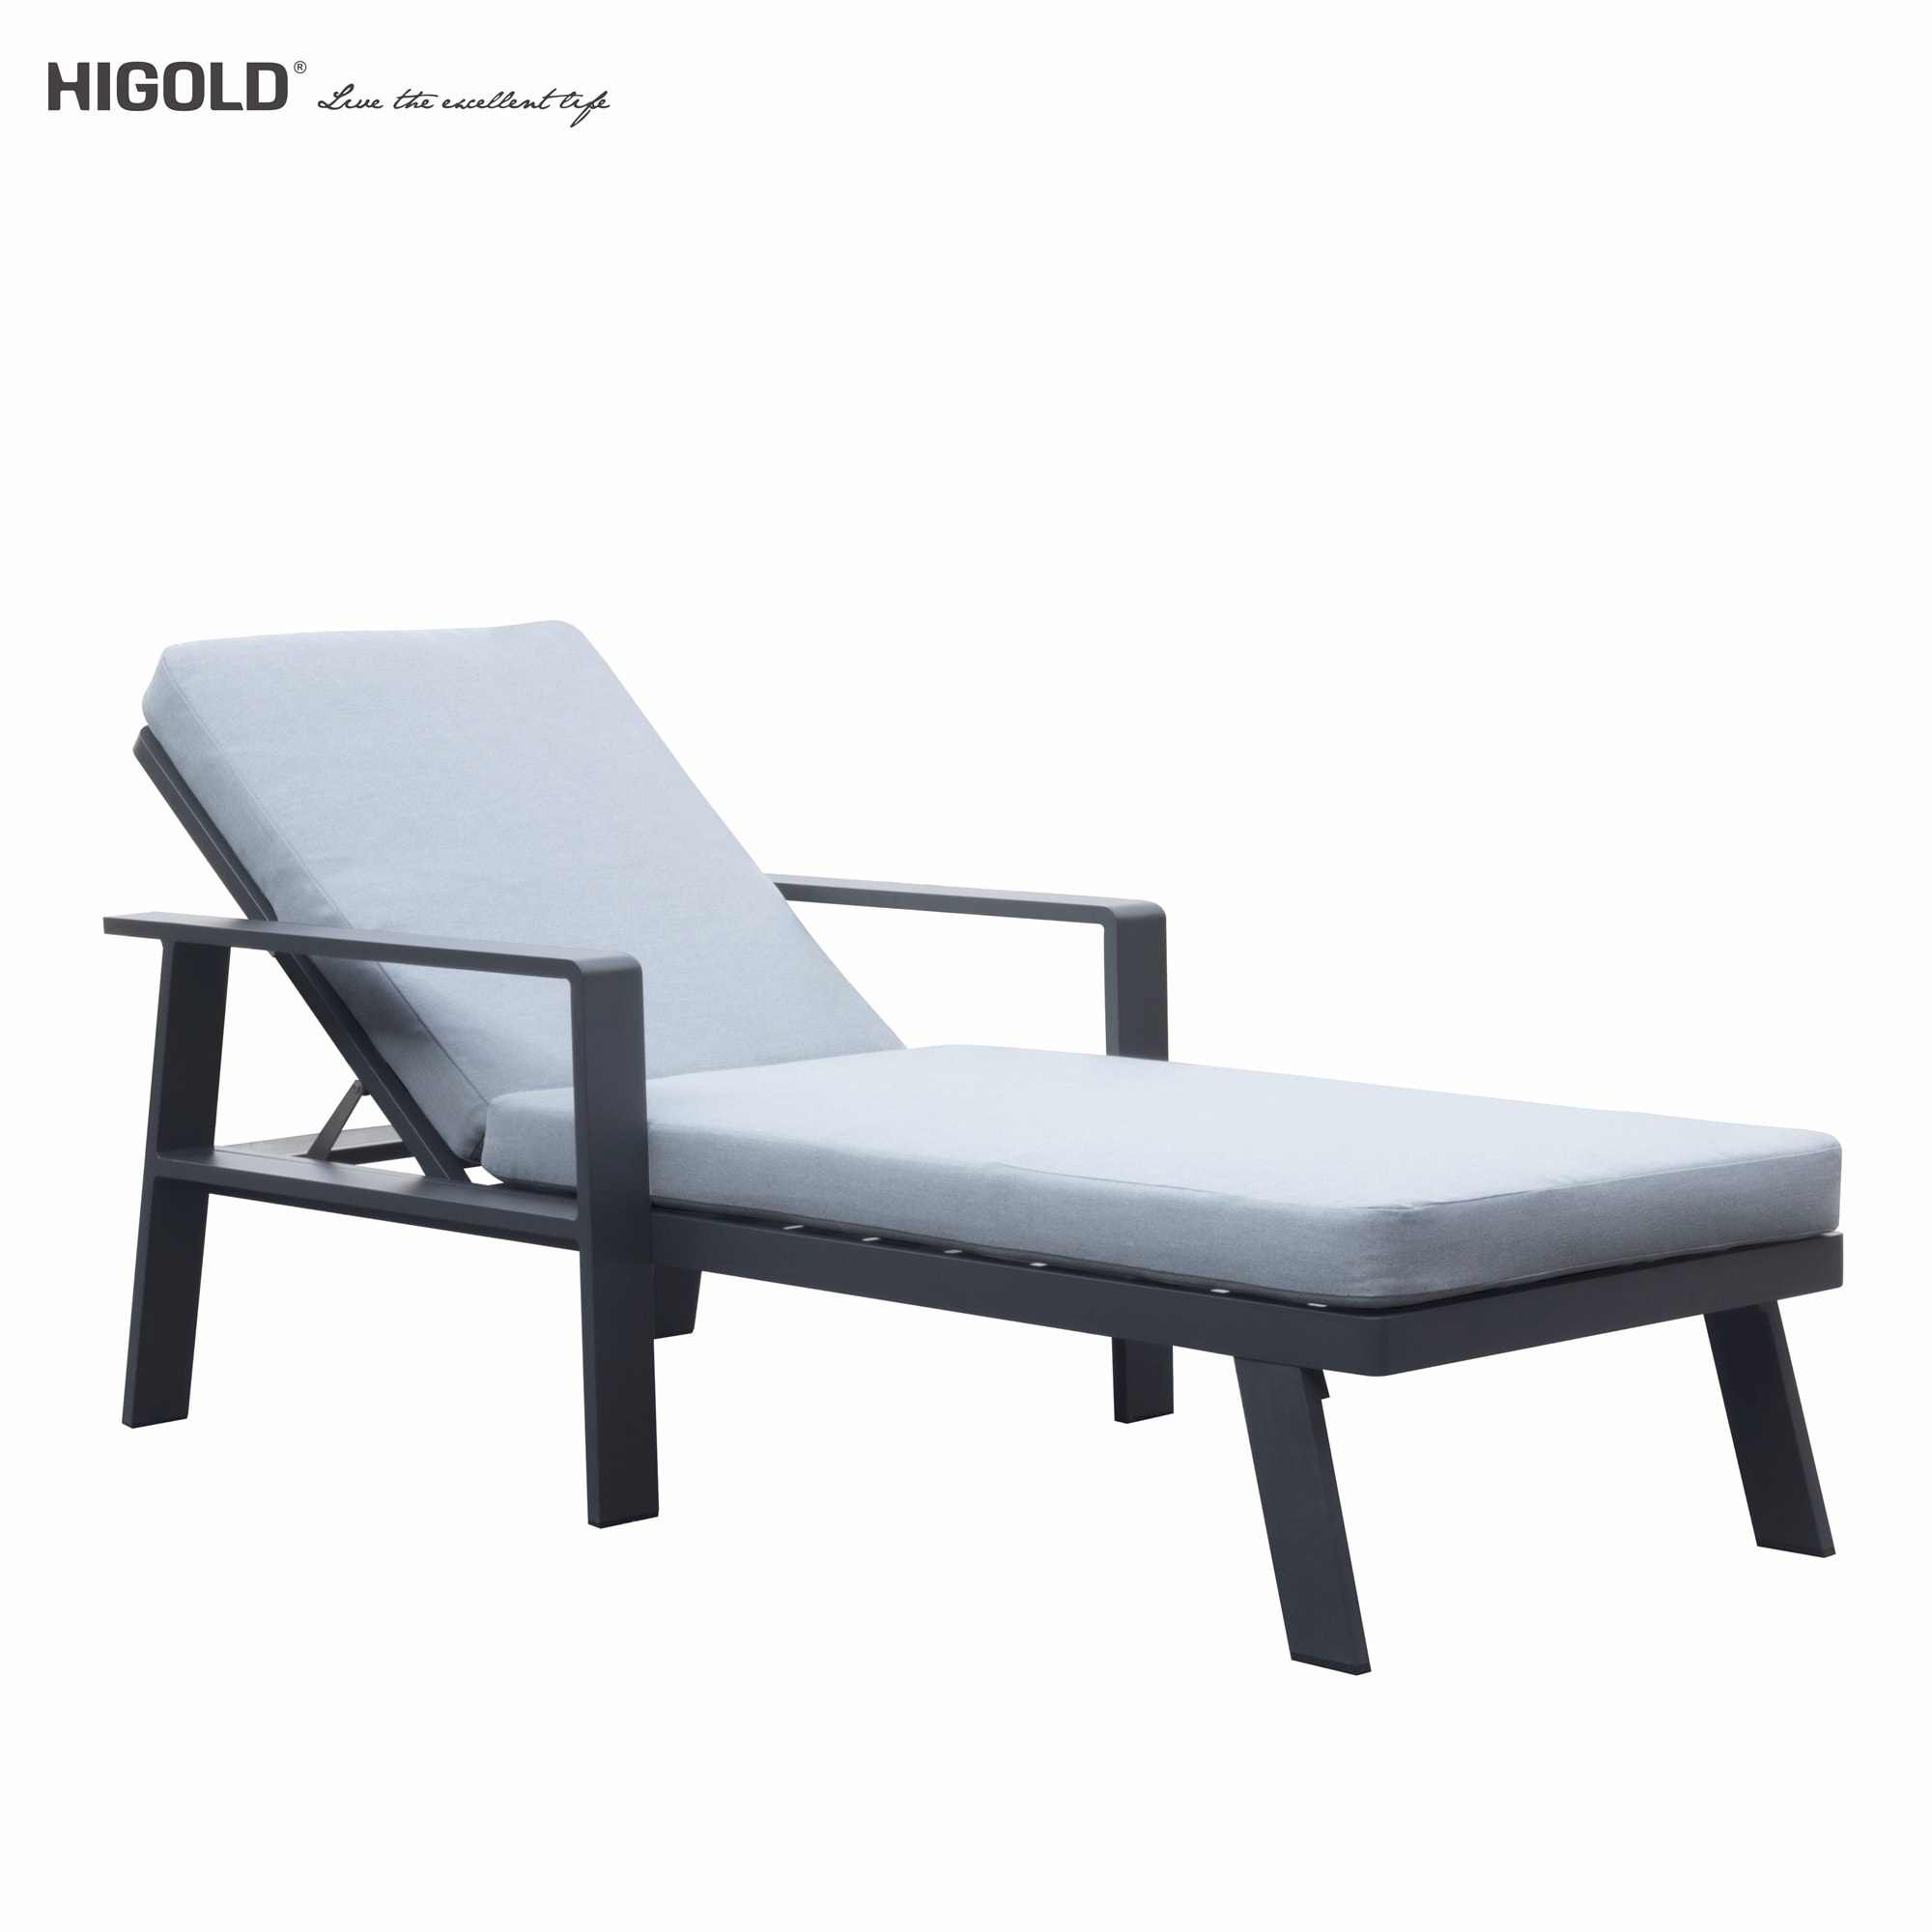 Nofi Outdoor Reclining Aluminum Chaise Lounge Chair  Charcoal Black  Grey Cushion By Higold